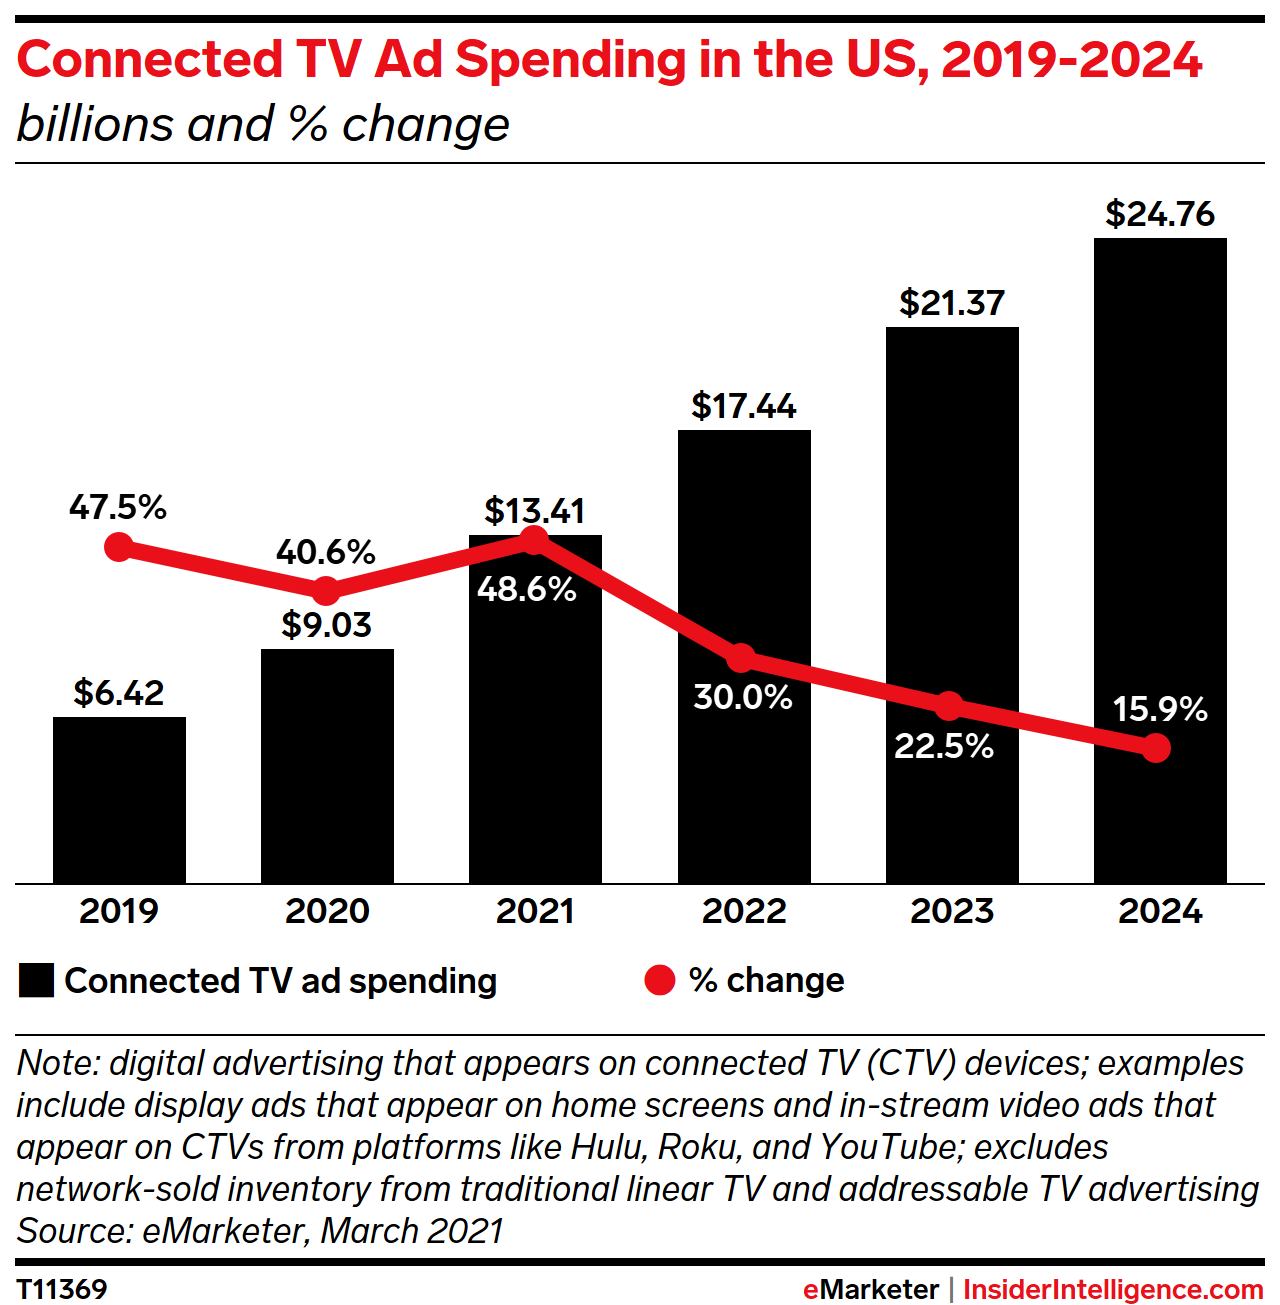 Connected TV Ad Spending in the US, 2019-2024 (billions and % change)